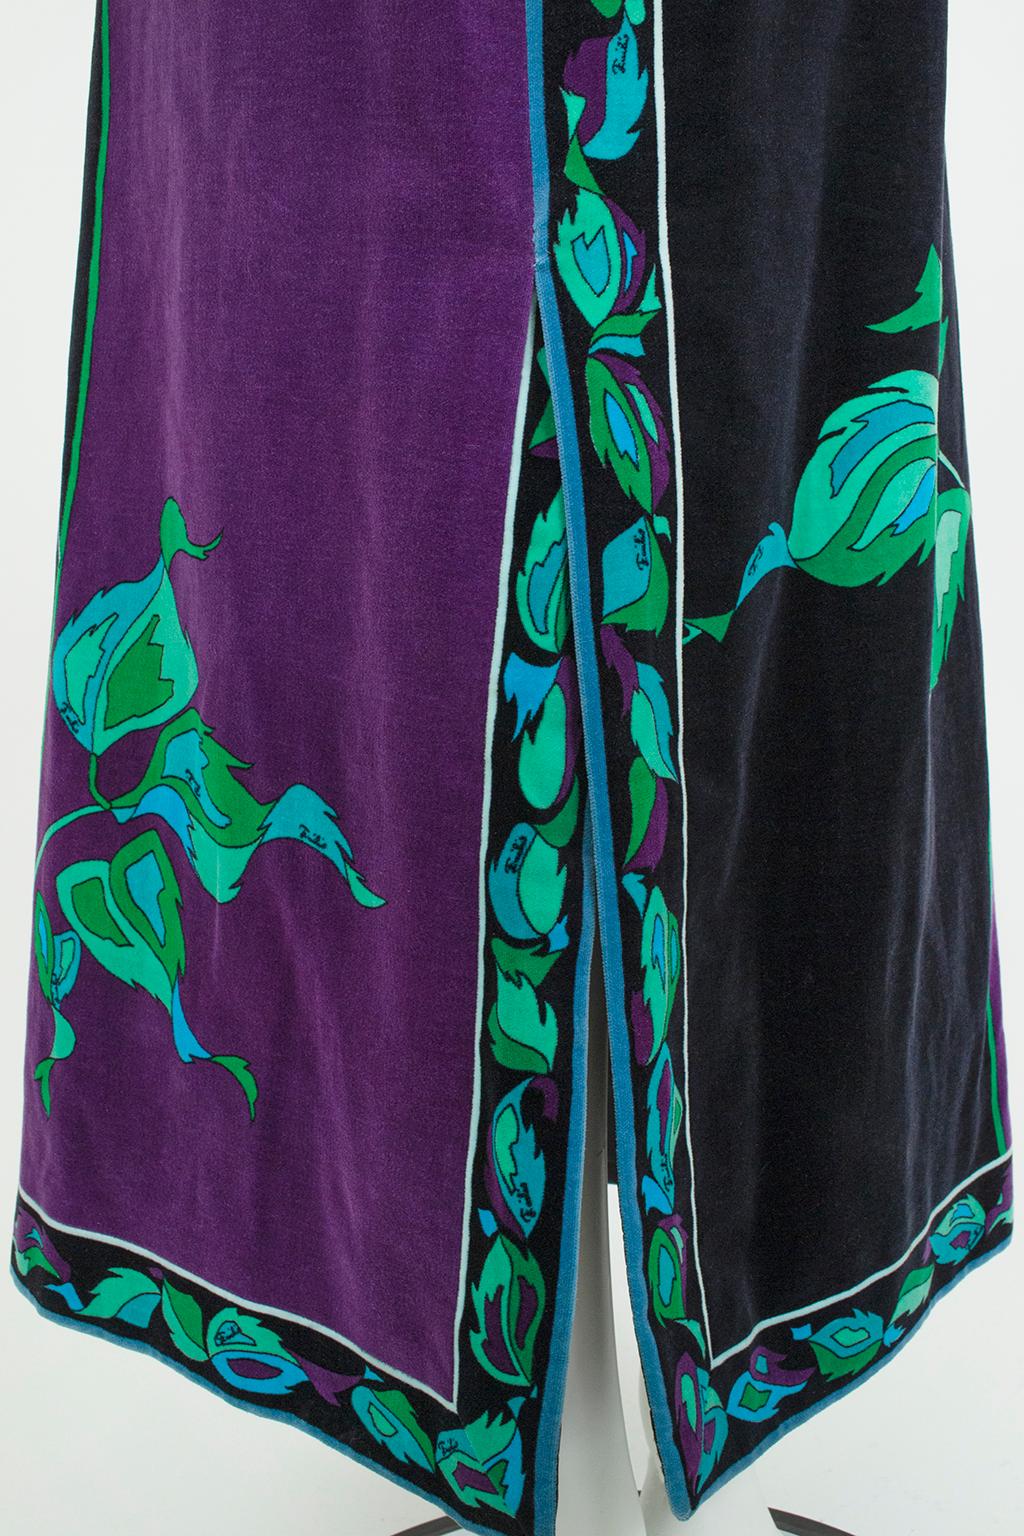 Emilio Pucci Black and Purple Rose Velvet Jacket and Maxi Skirt, Saks – S, 1971 For Sale 13